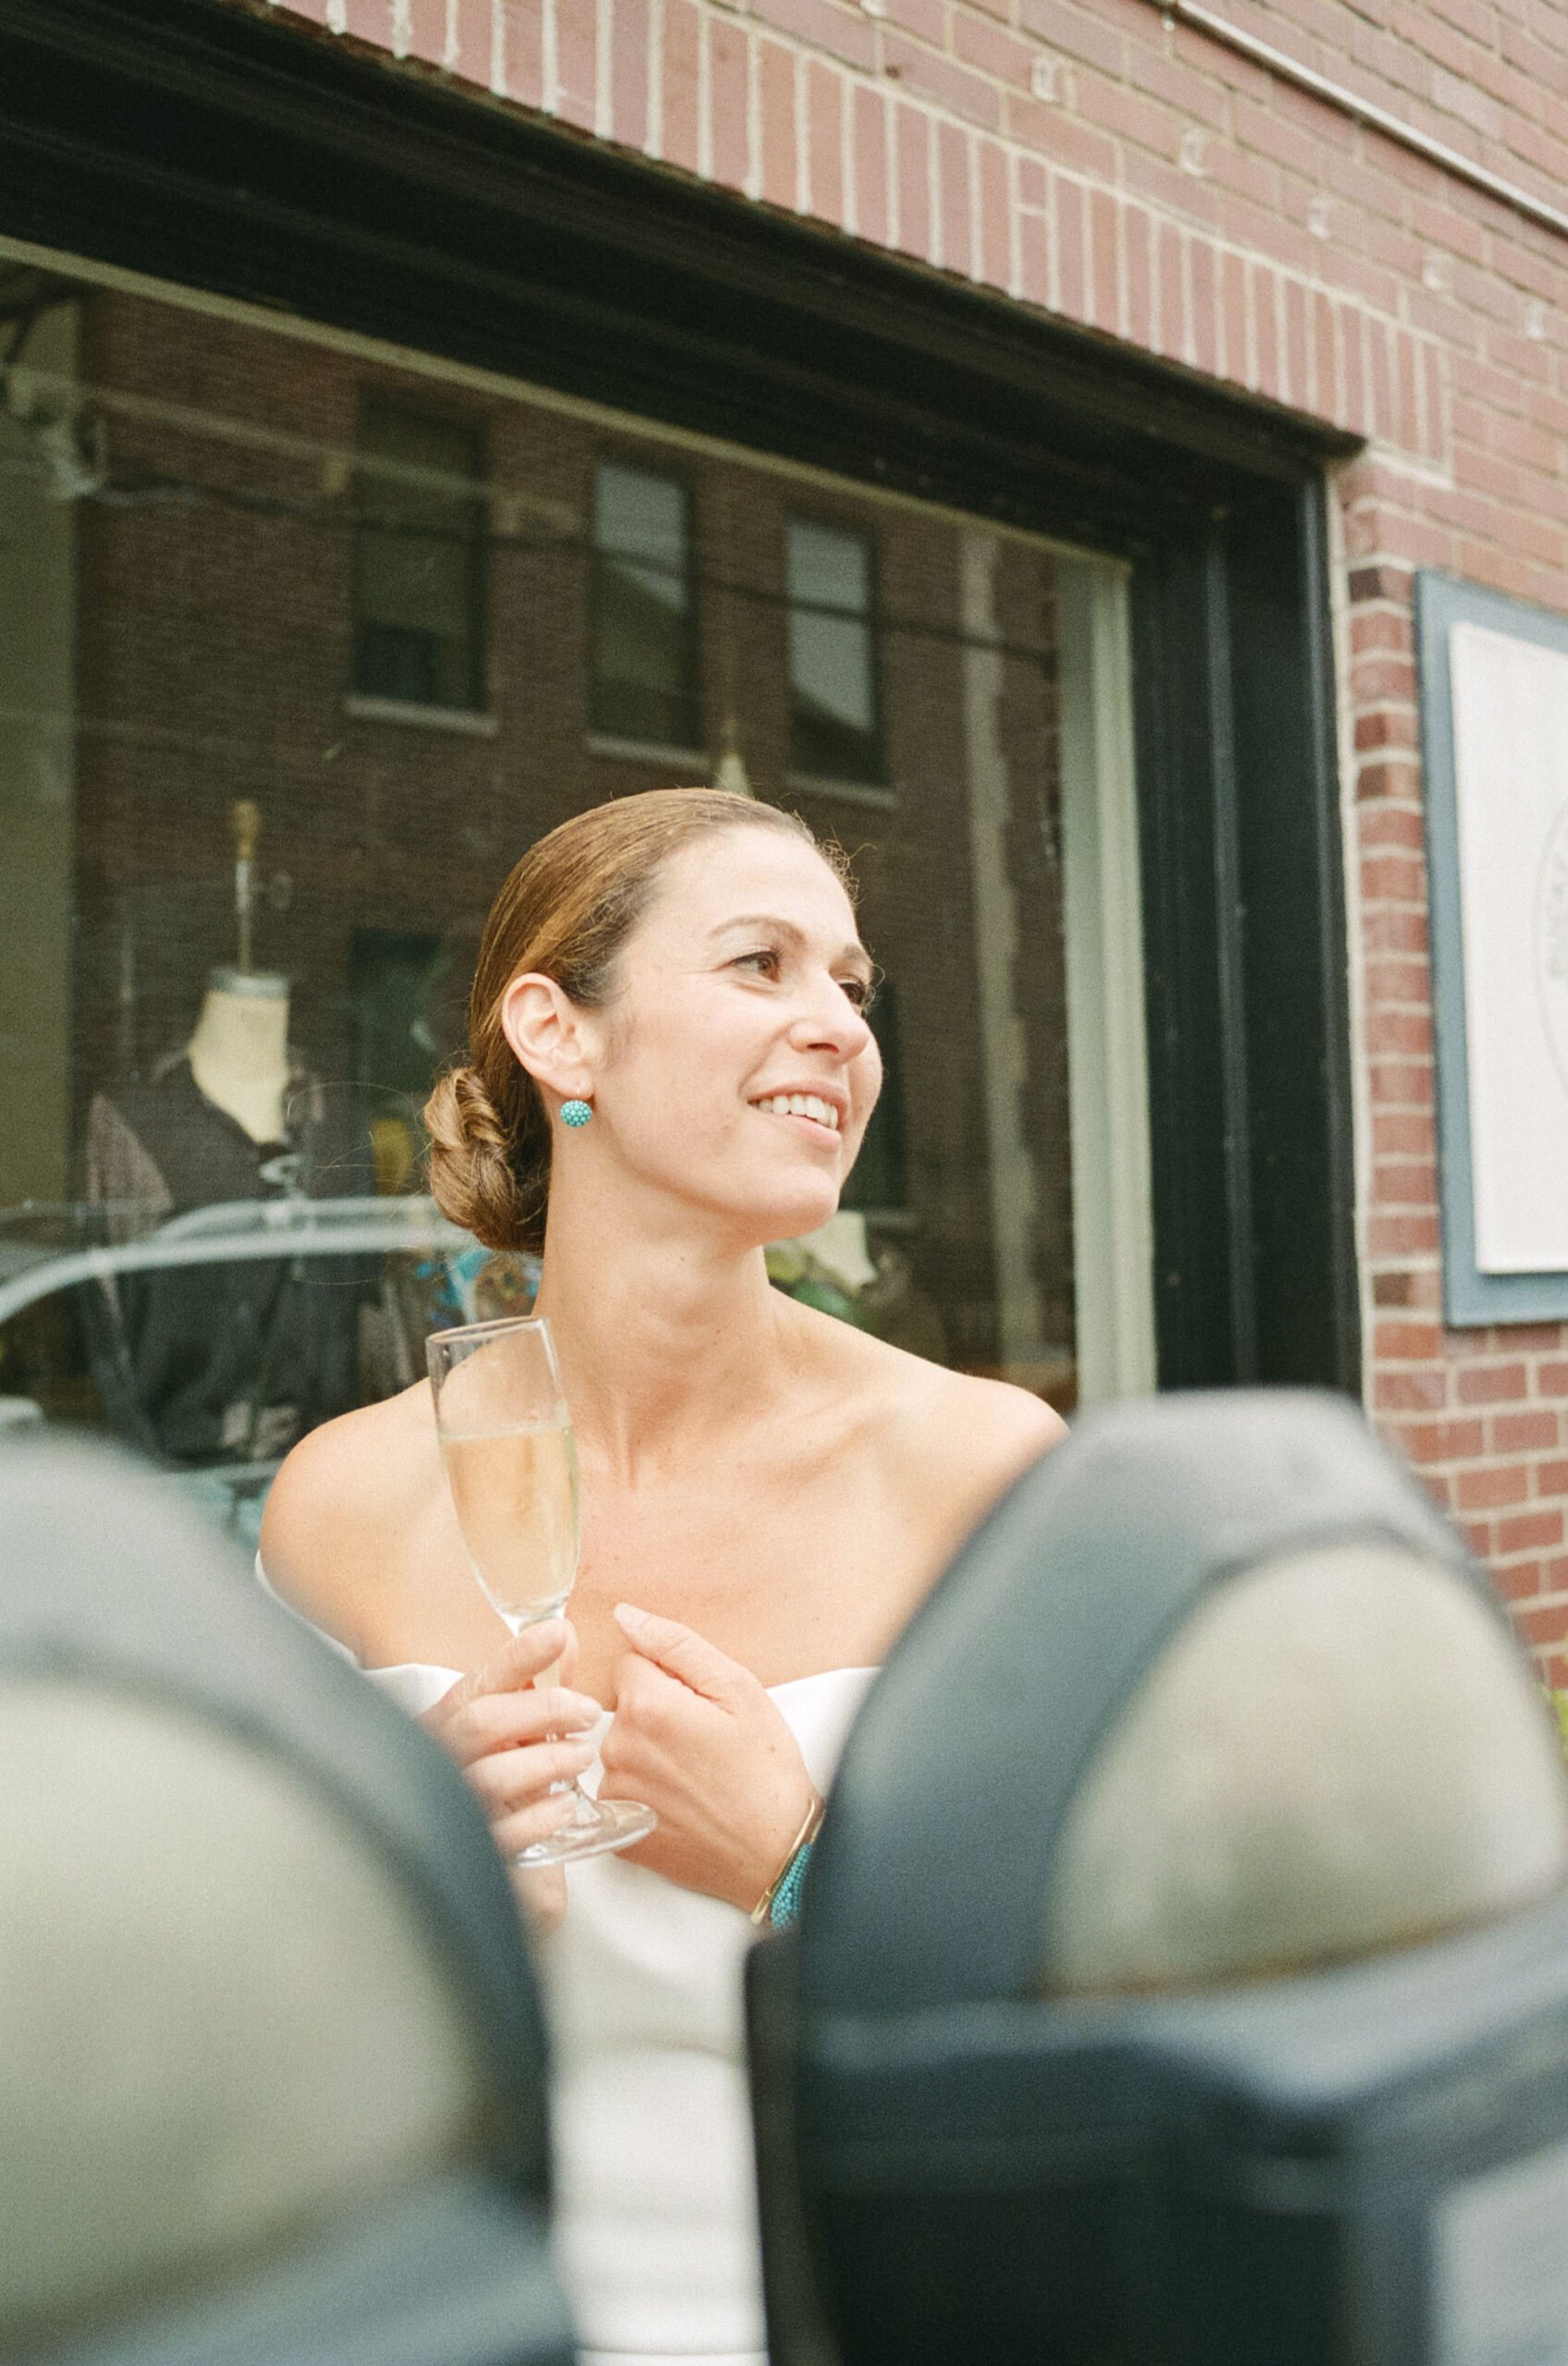 Color candid photo of an elegant bride near parking meters outside her intimate wedding reception at Brian's restaurant in Lambertville, NJ